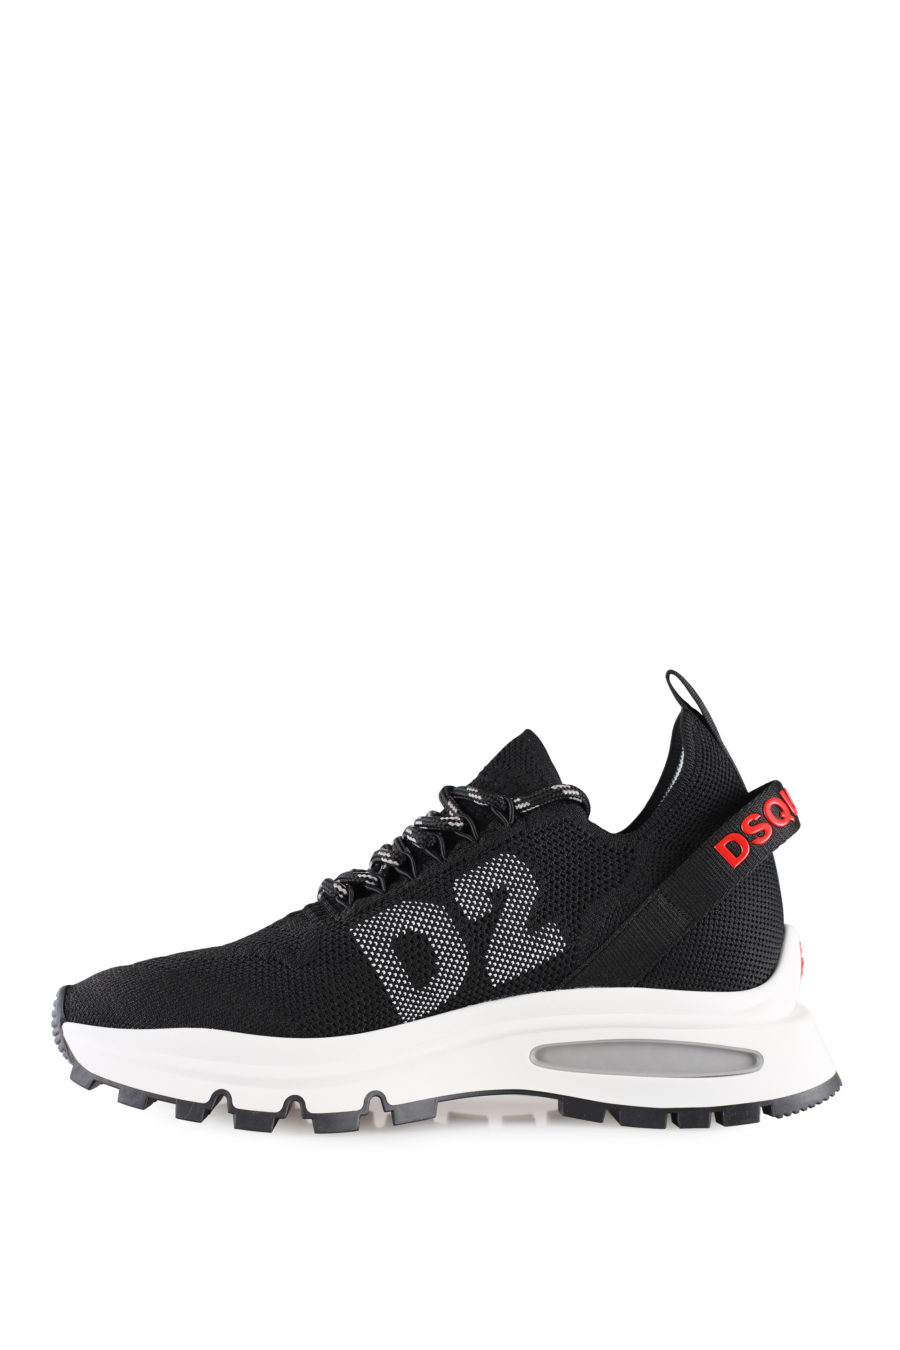 Black trainers with small red logo and "D2" - IMG 0008